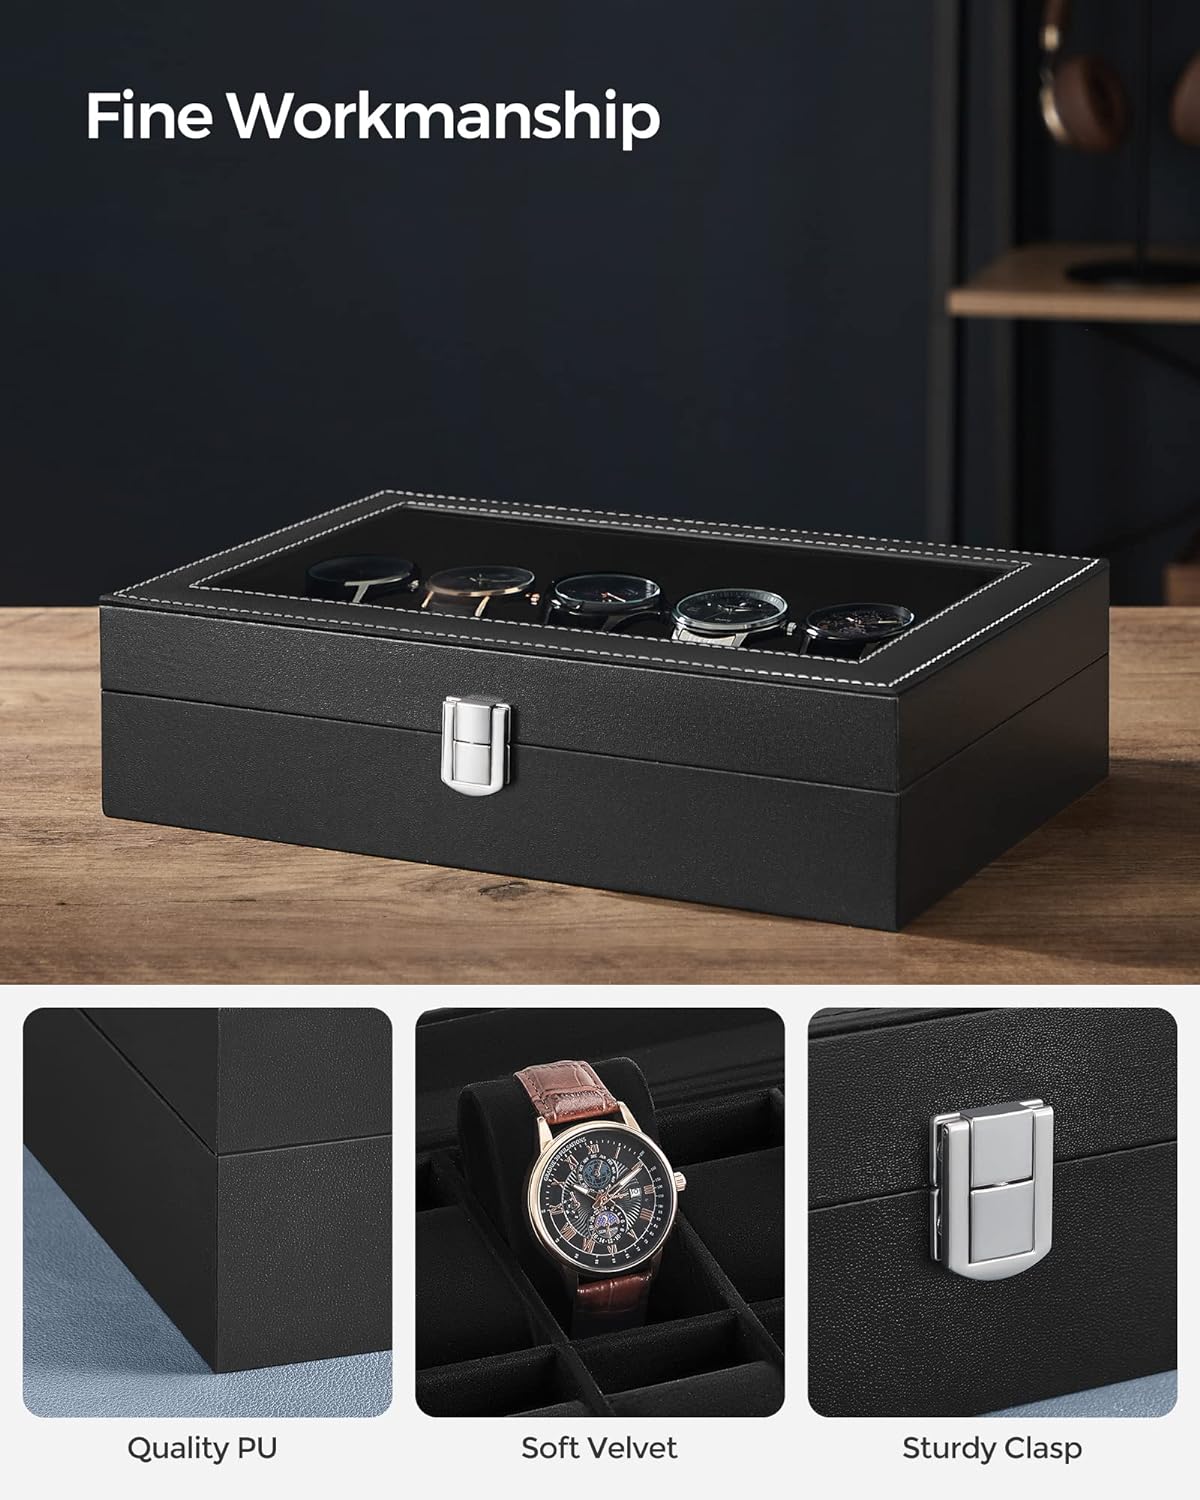 SONGMICS 12-Slot Watch Box with Large Glass Lid and Removable Watch Pillows Black Lining-Men&